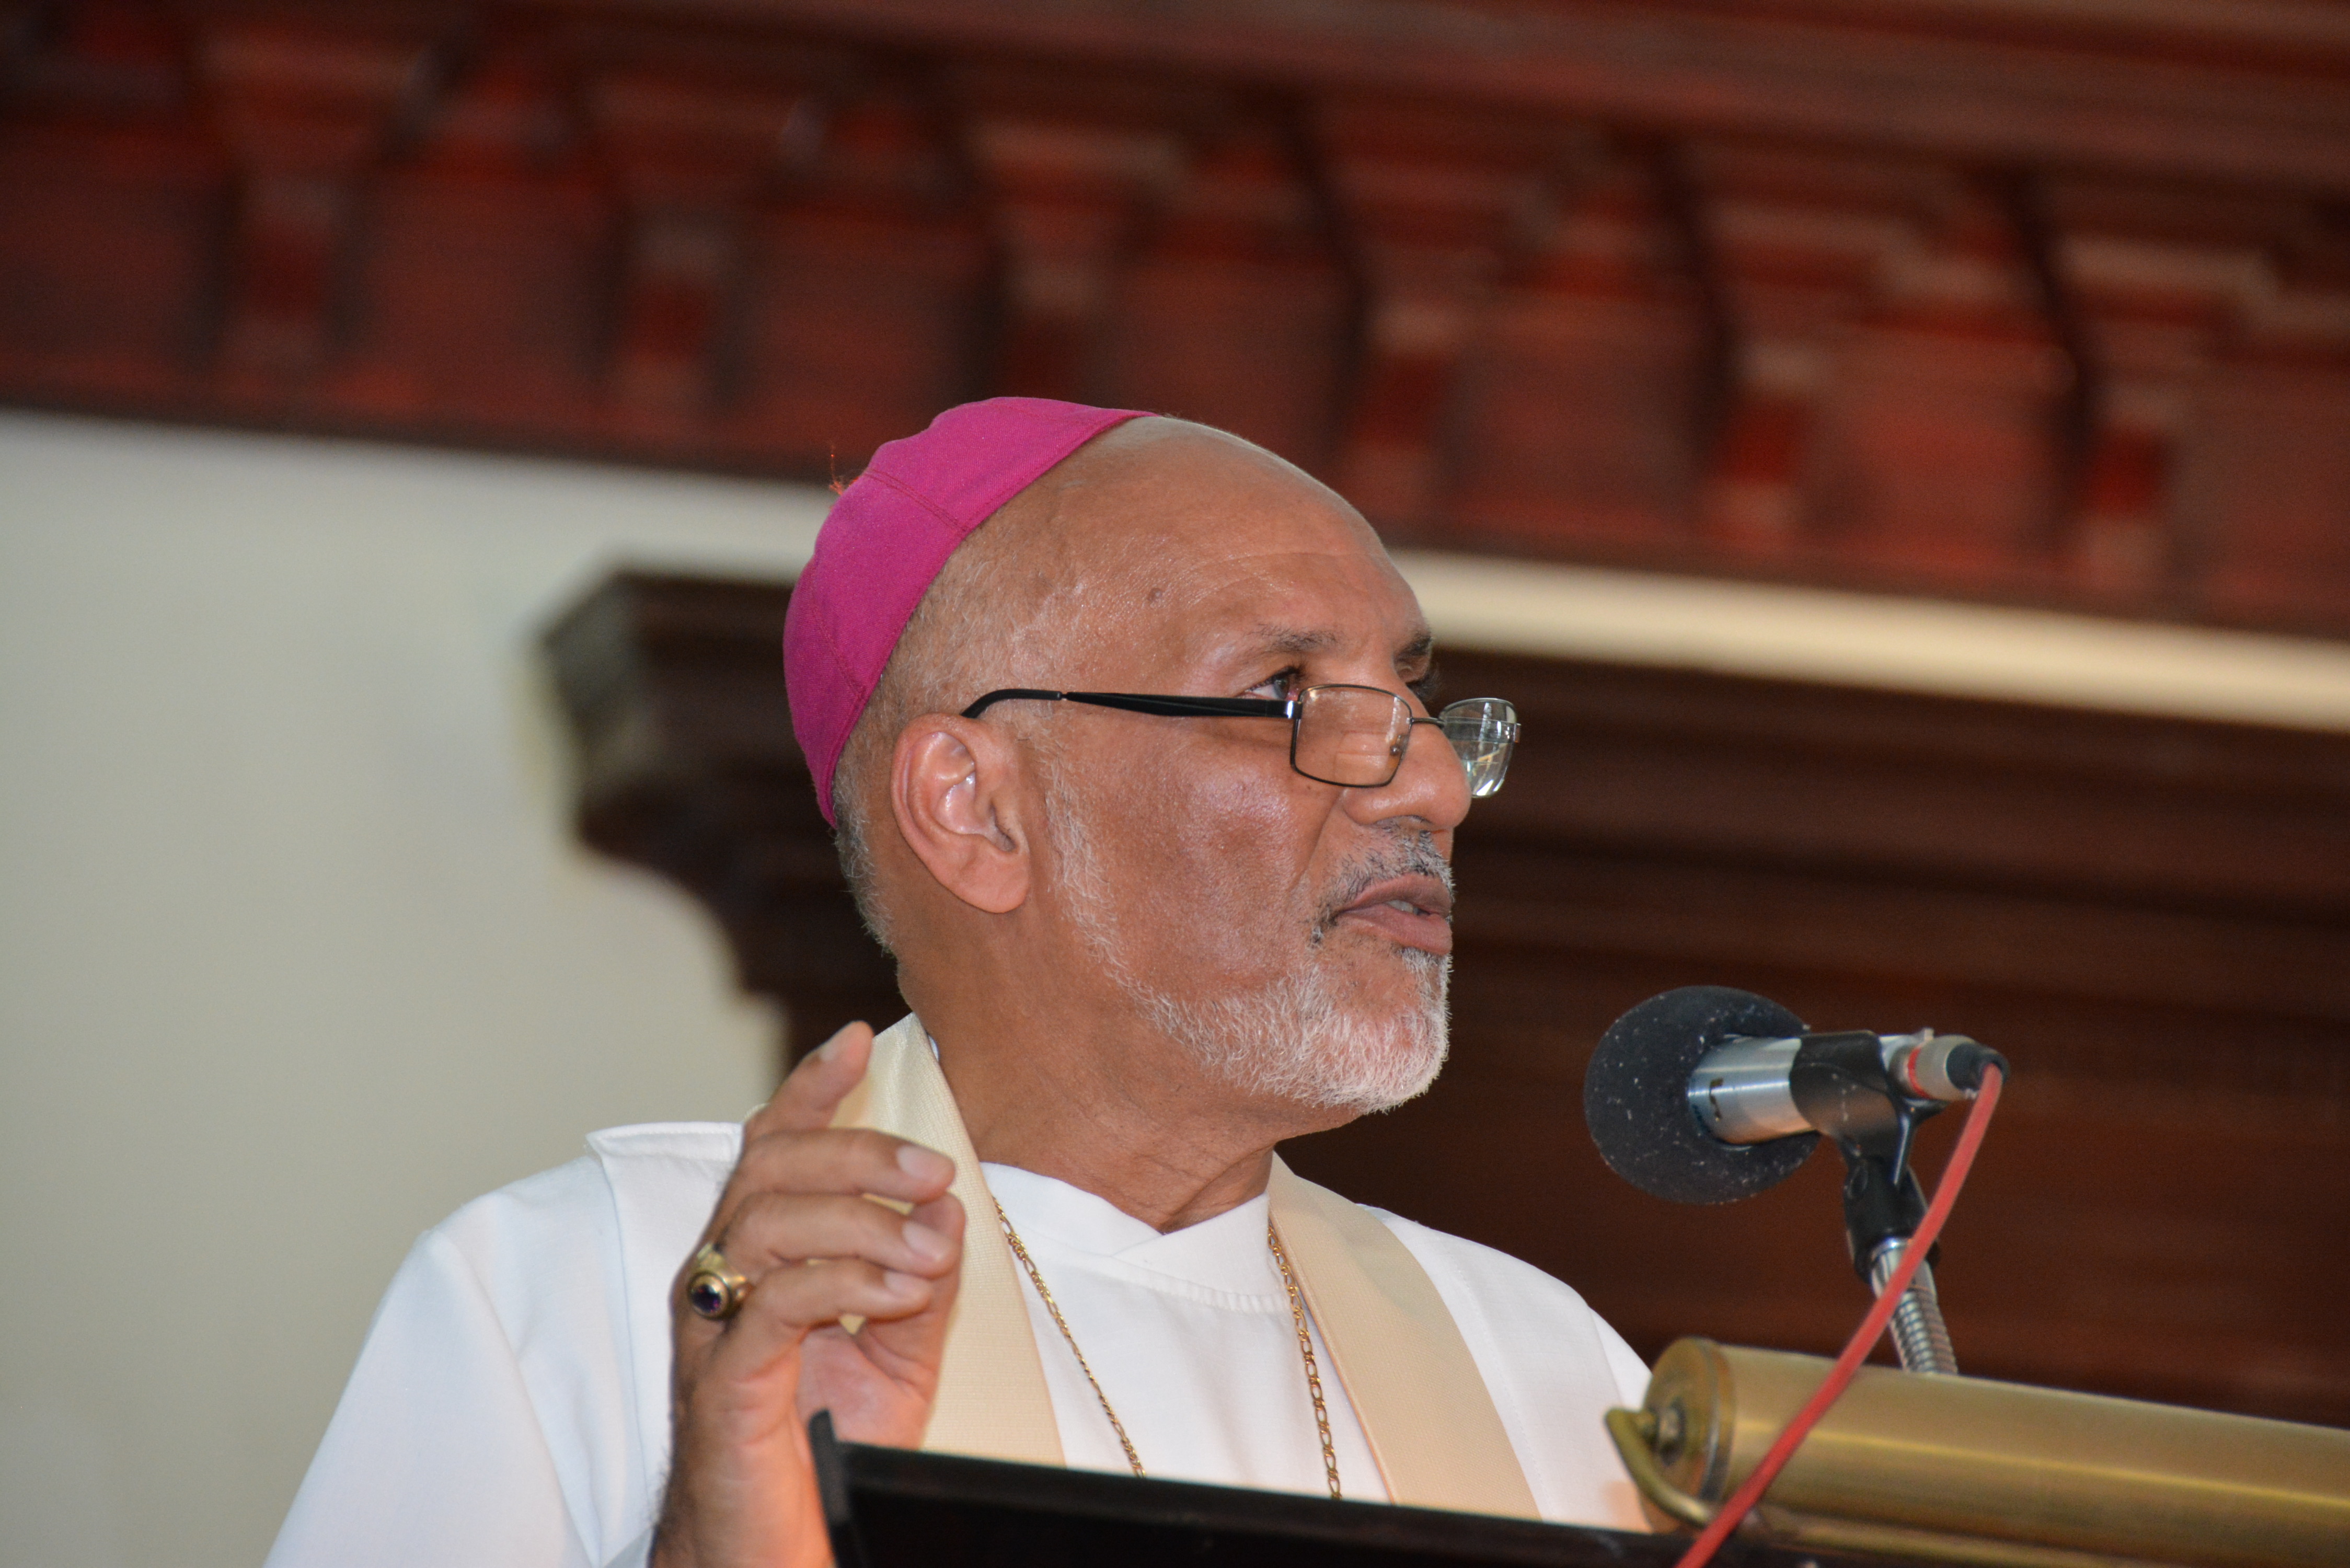 The Church and Nation Responsible for Current State The Lord Bishop Charges